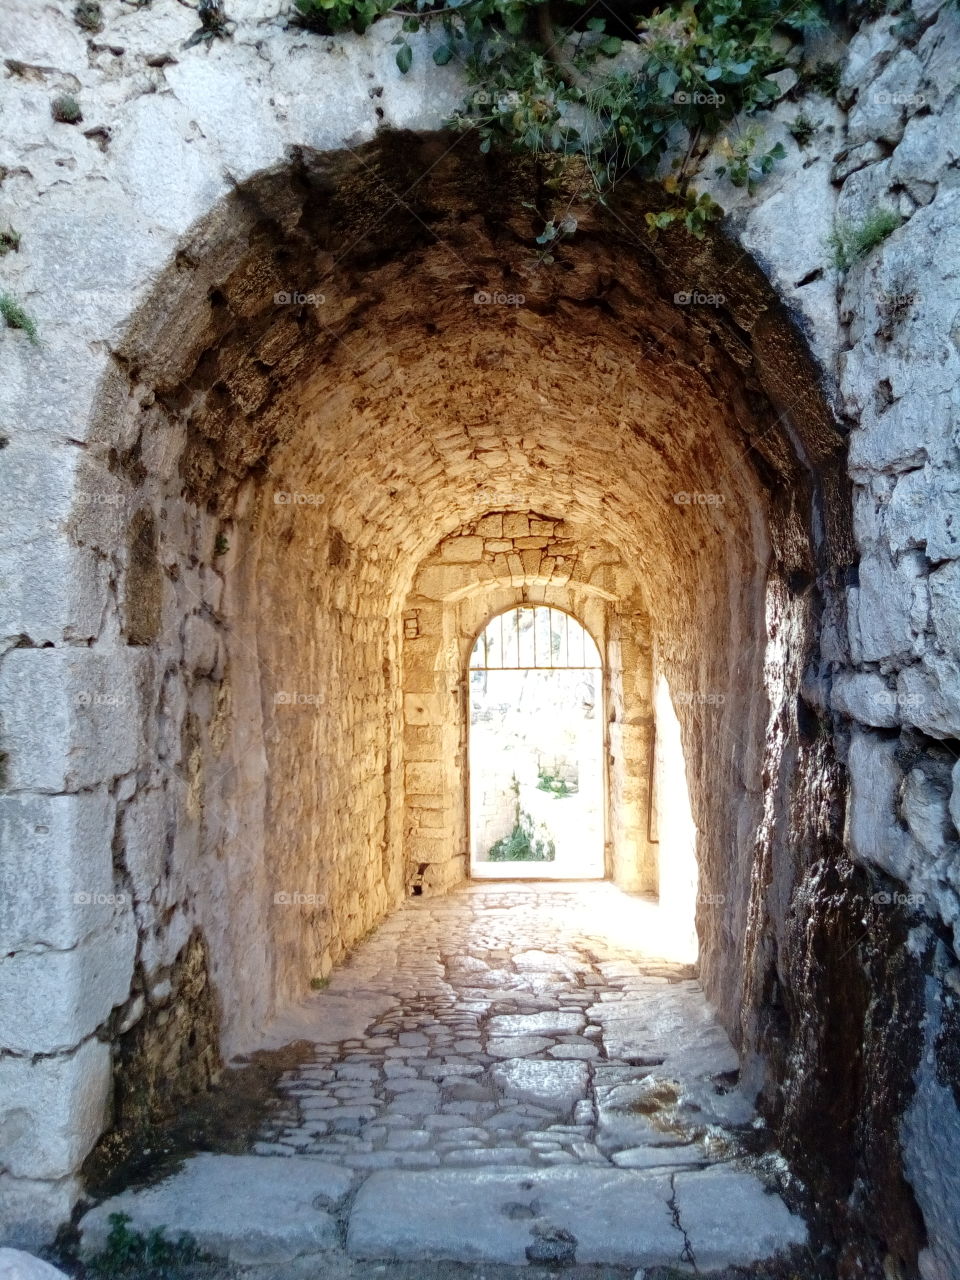 Inside the fortress of Klis.